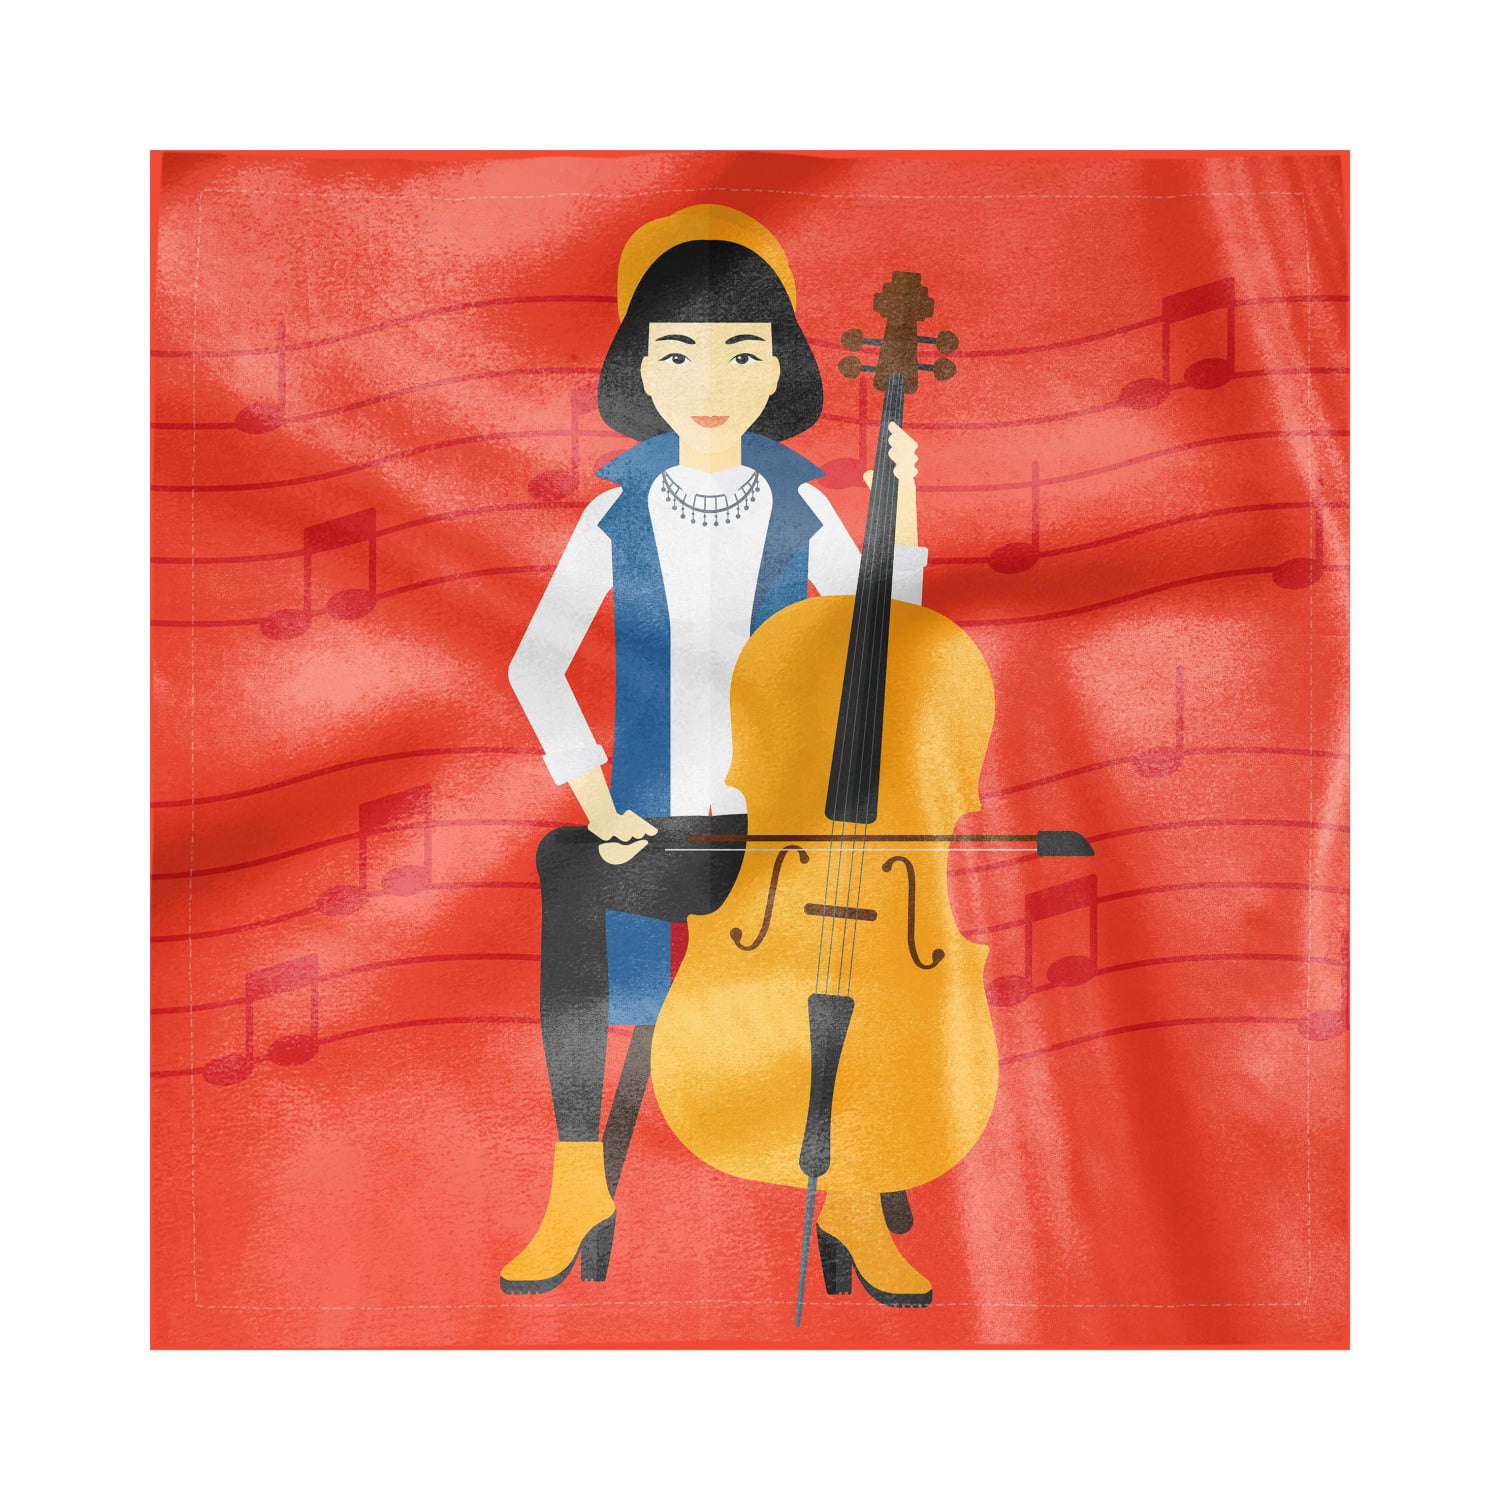 Cello Decorative Satin Napkins Set of 4, Cartoon of Woman Playing String  Instrument on Music Notes, Square Fabric Party & Dinner Napkin, 18